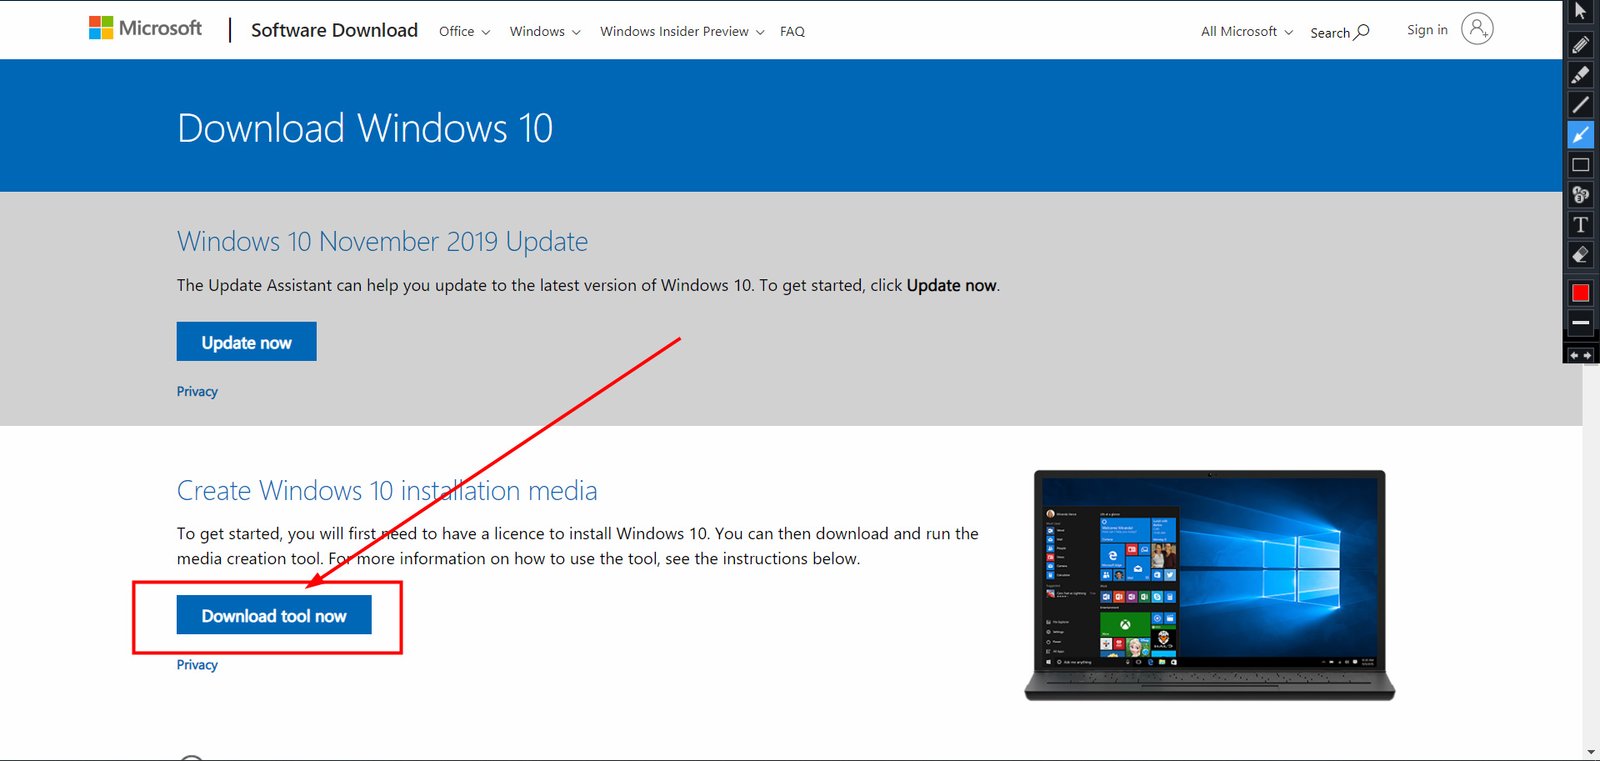 go to the download windows 10 website